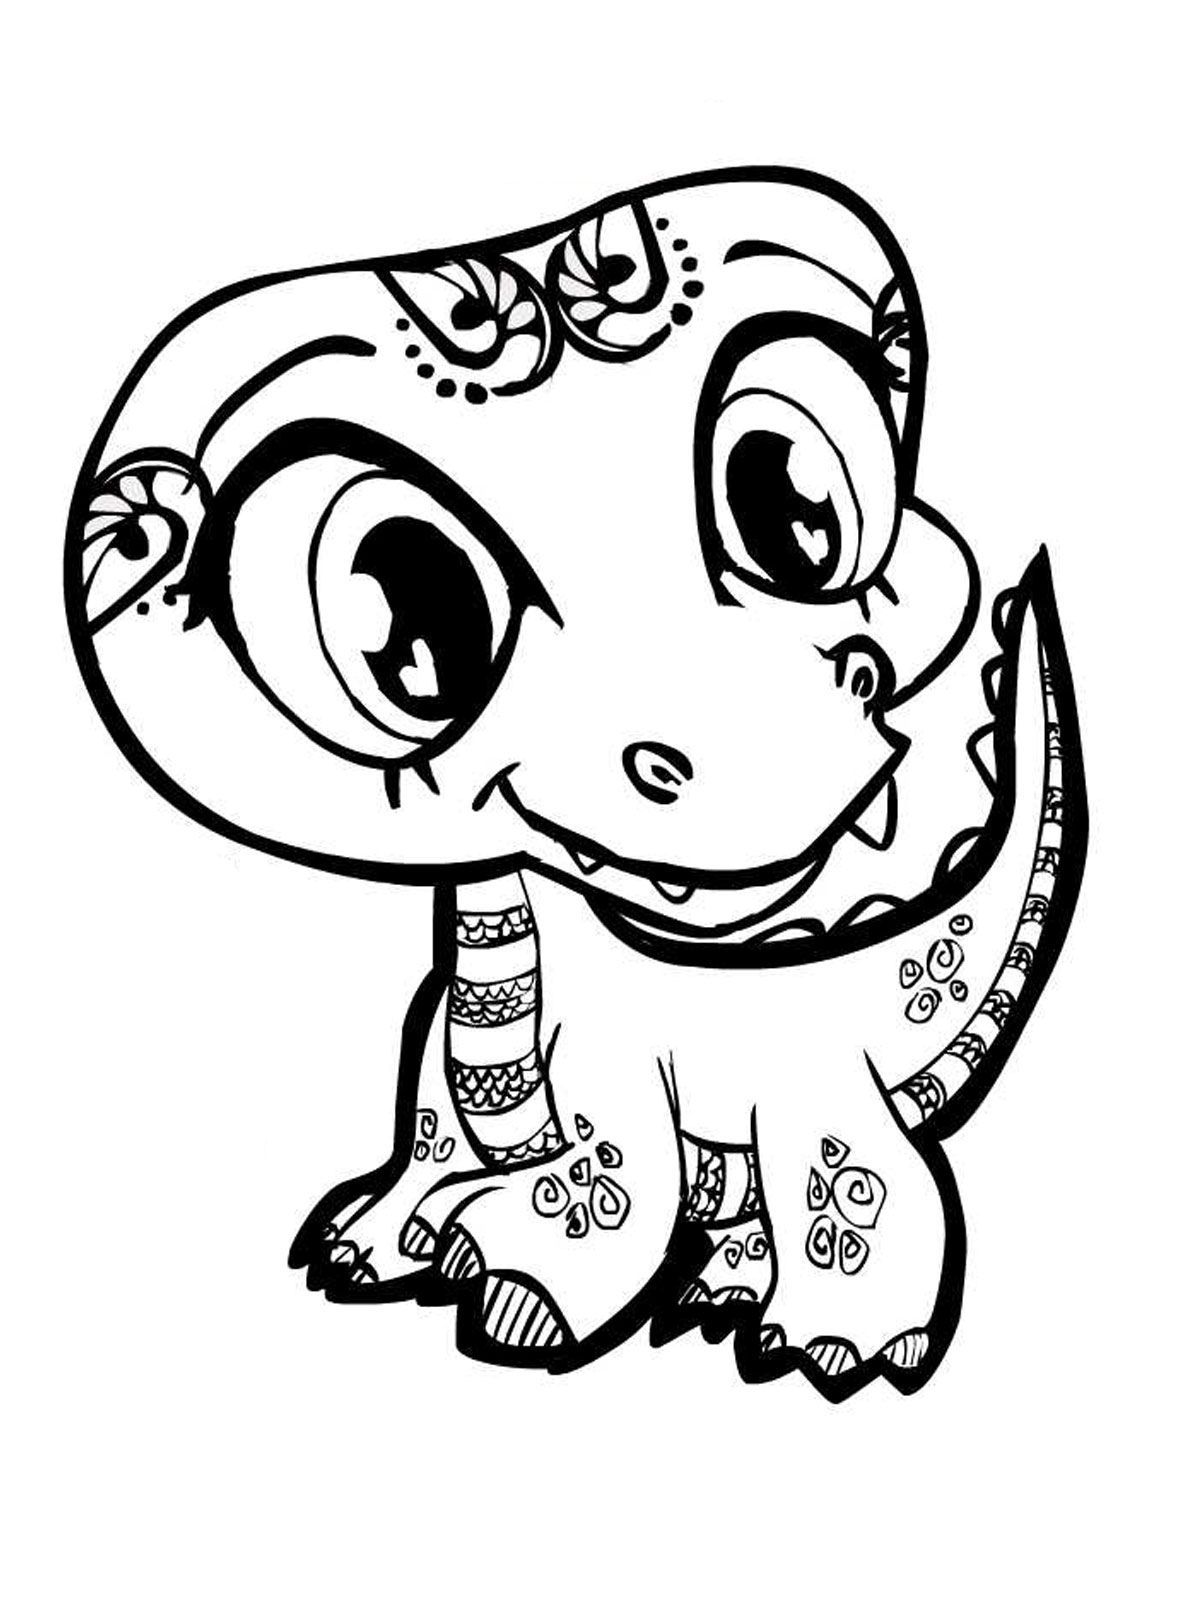 Baby Animal Coloring Pages For Girls - Coloring Pages For All Ages